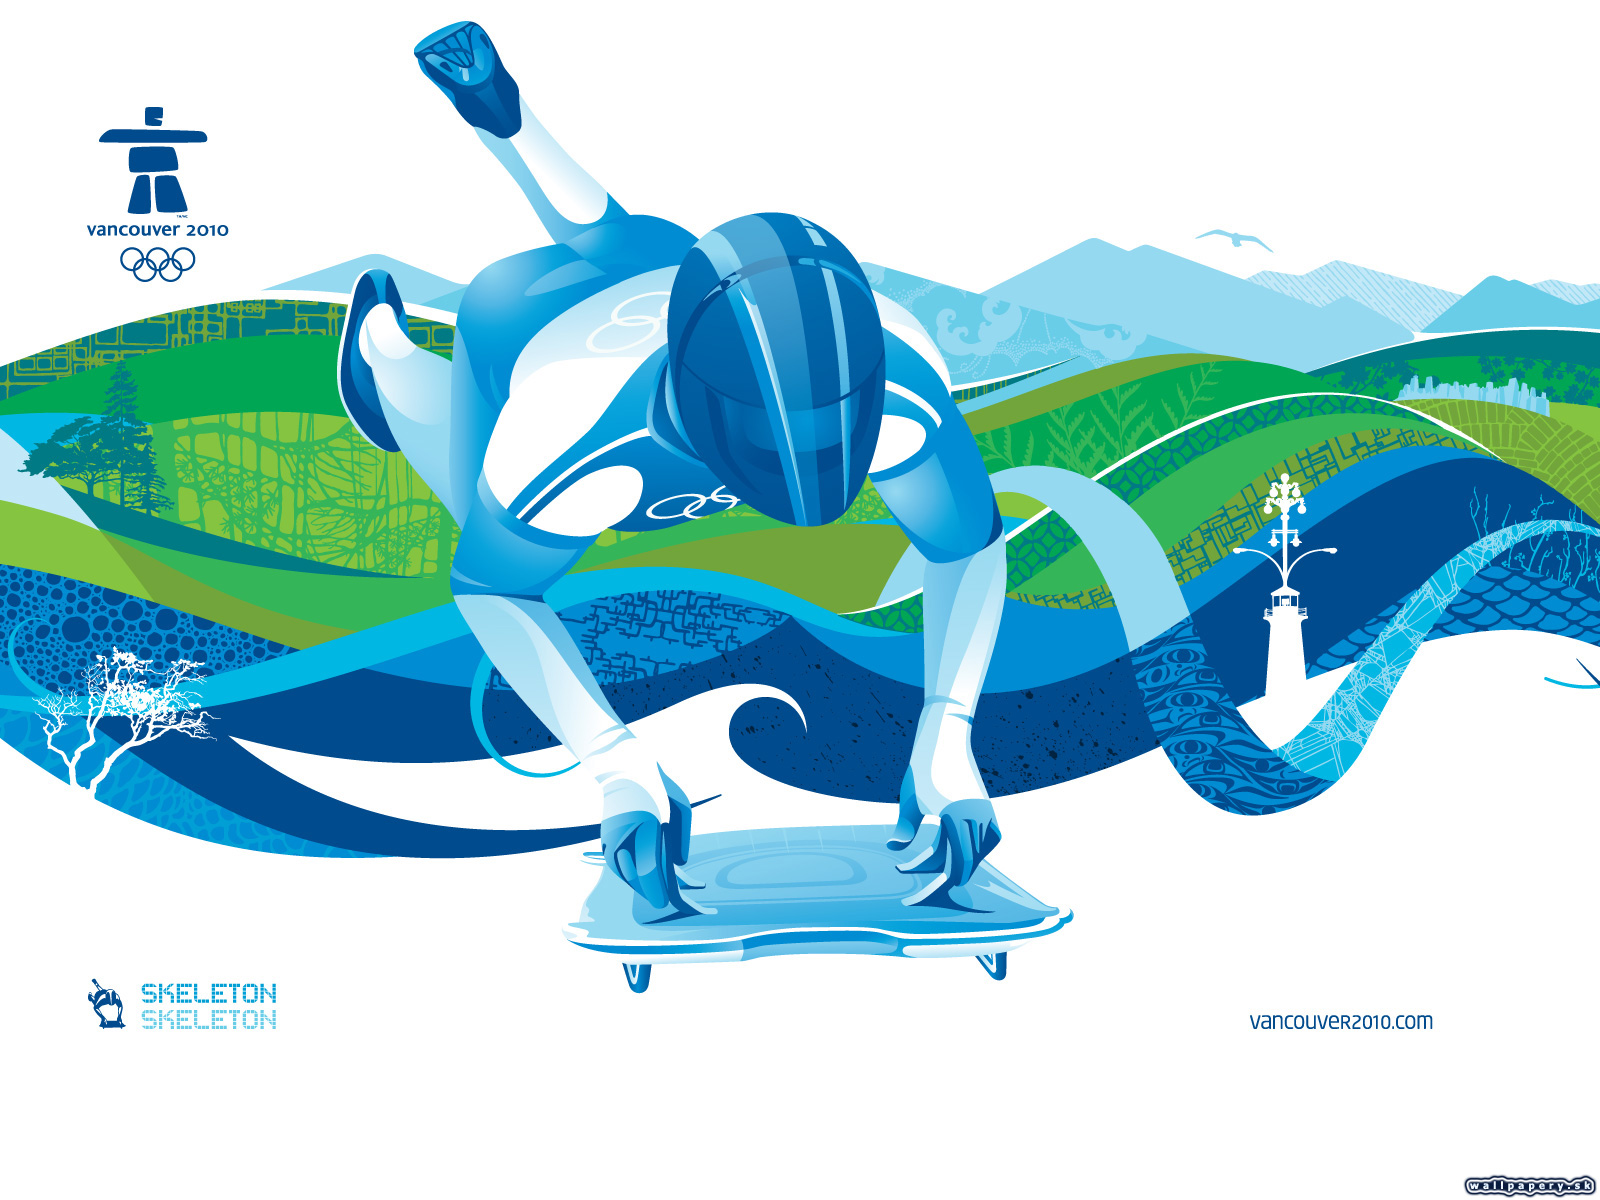 Vancouver 2010 - The Official Video Game of the Olympic Winter Games - wallpaper 13